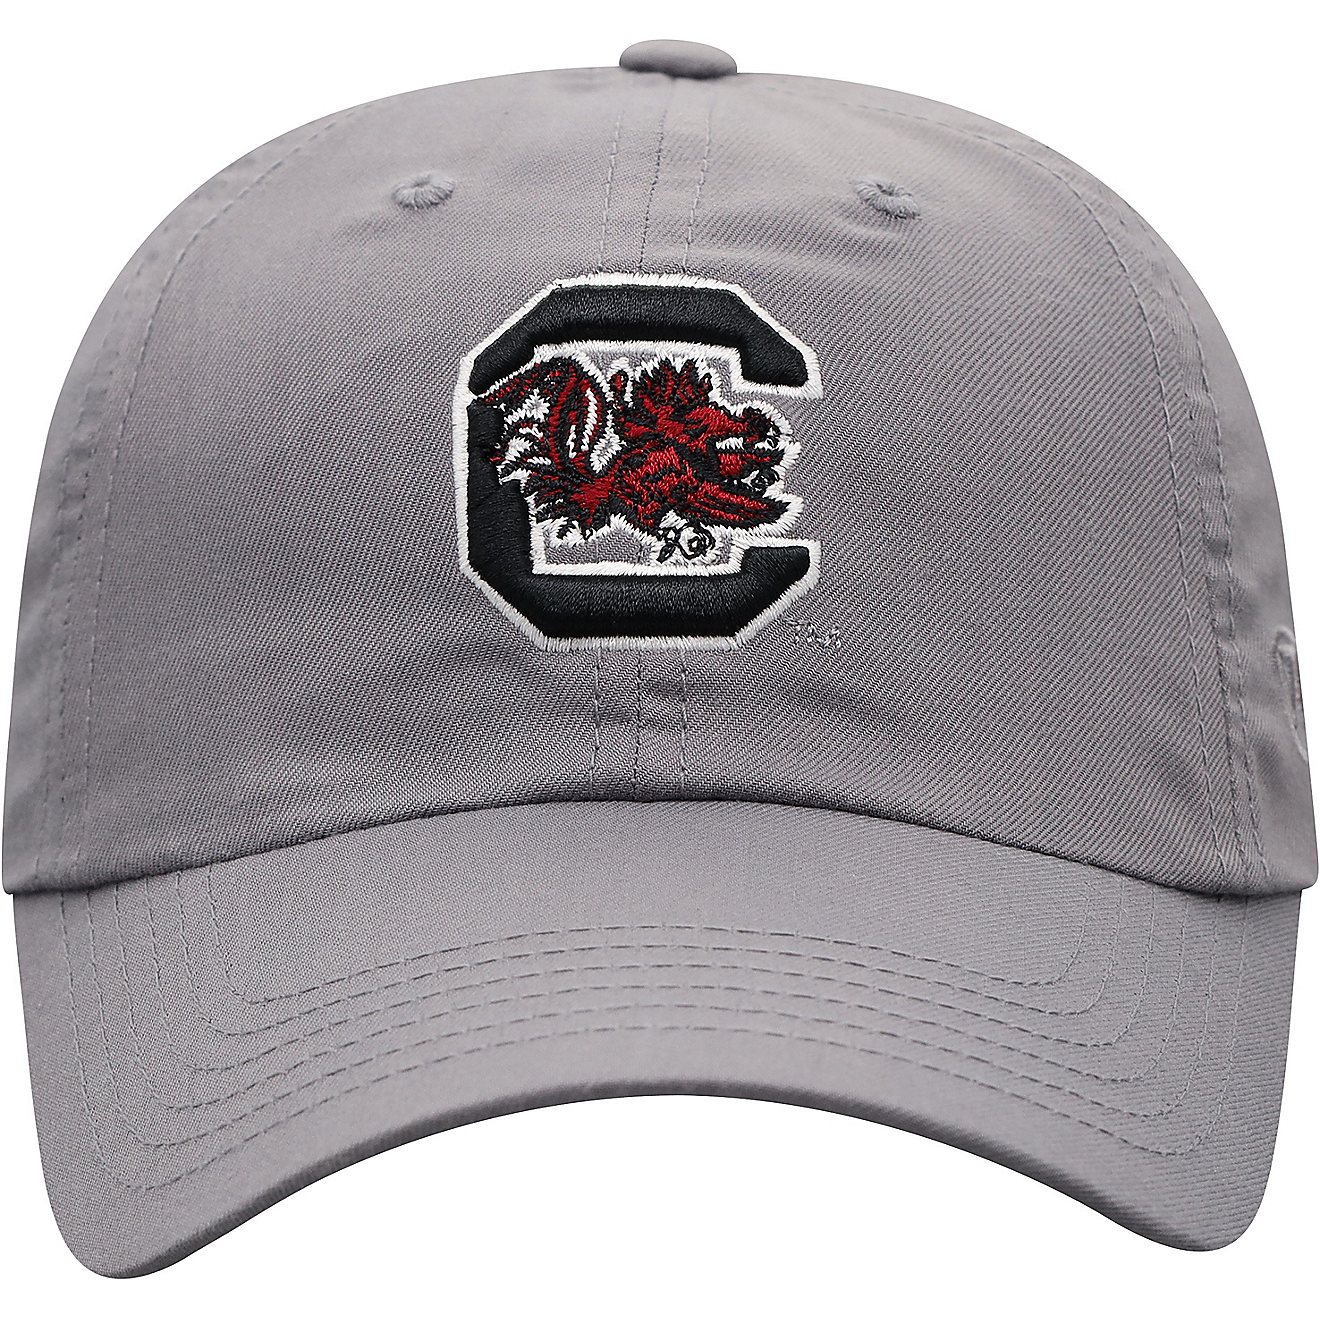 Top of the World Men's University of South Carolina Staple Cap                                                                   - view number 2